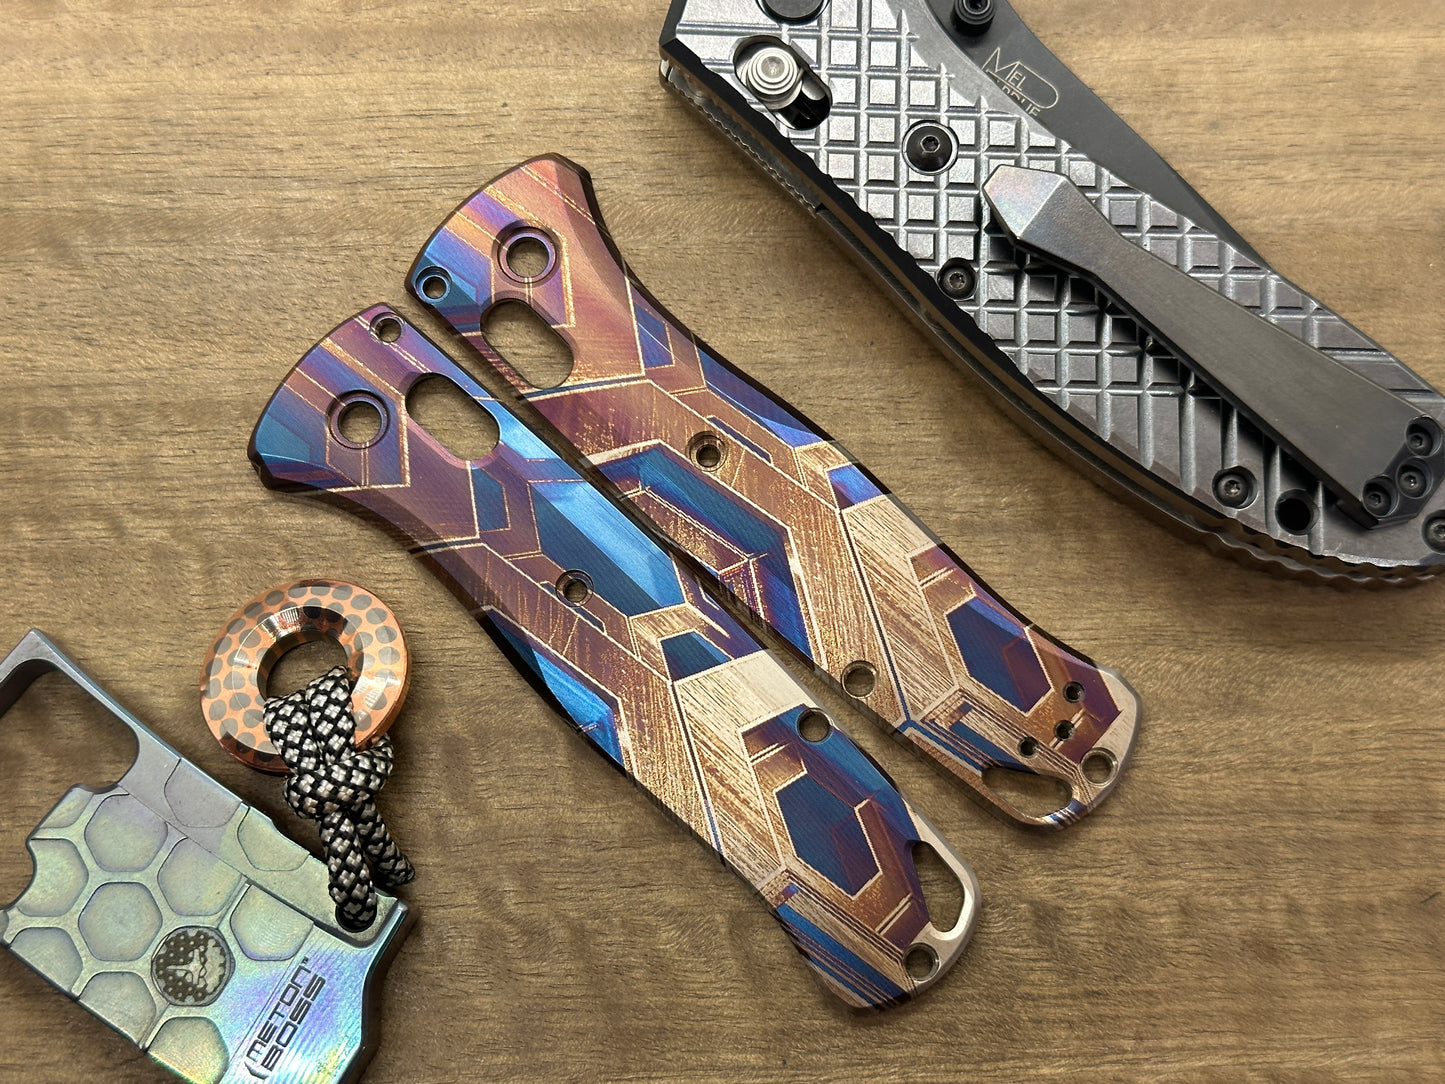 FALCON heat ano Titanium Scales for Benchmade Bugout 535